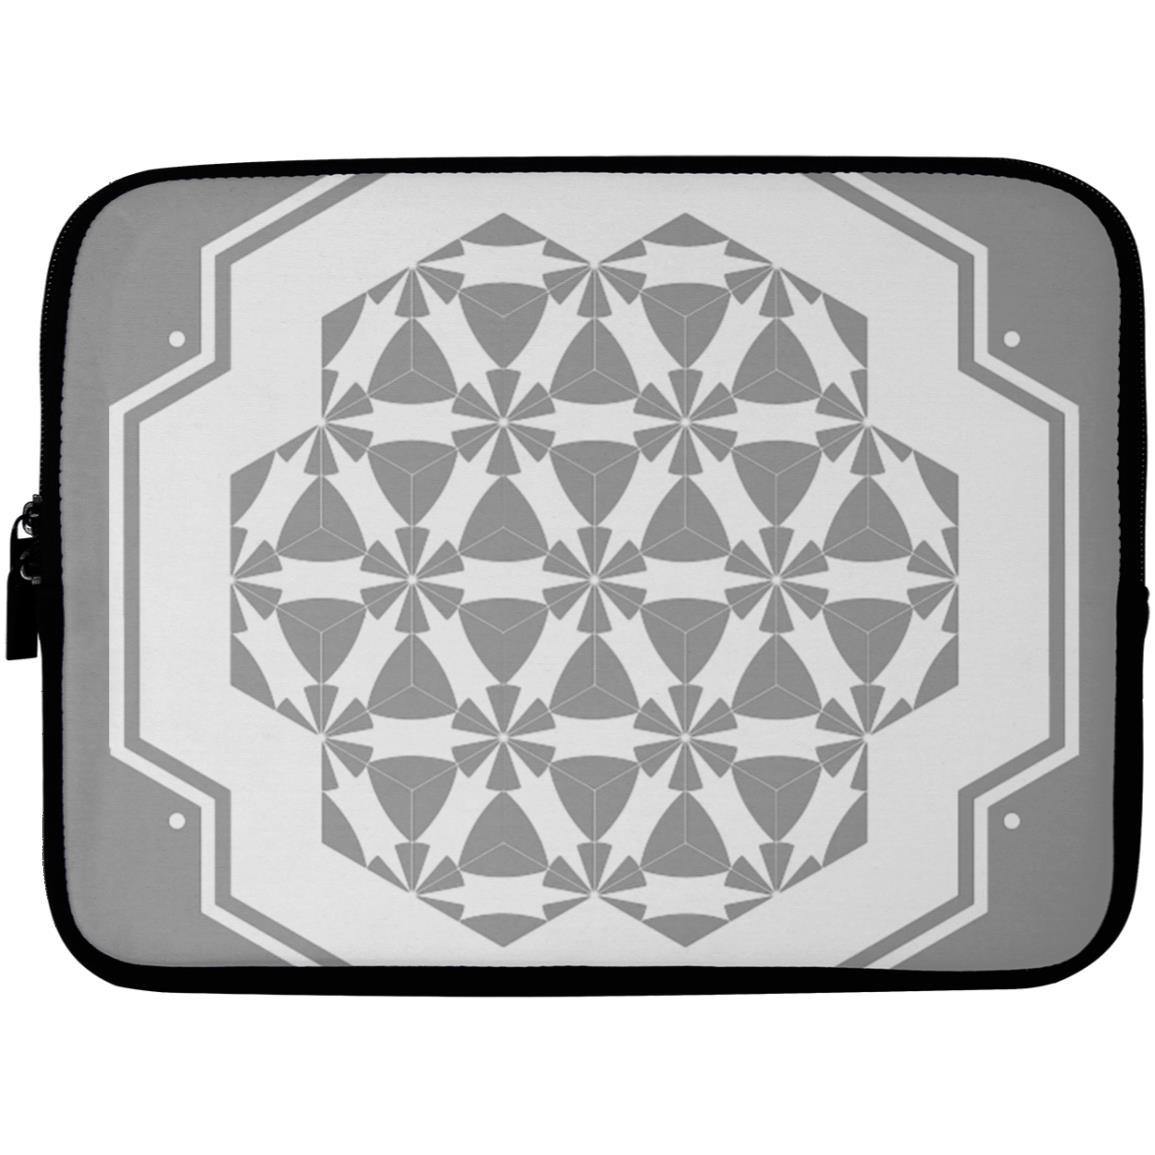 Crop Circle Laptop Sleeve - West Overton - Shapes of Wisdom